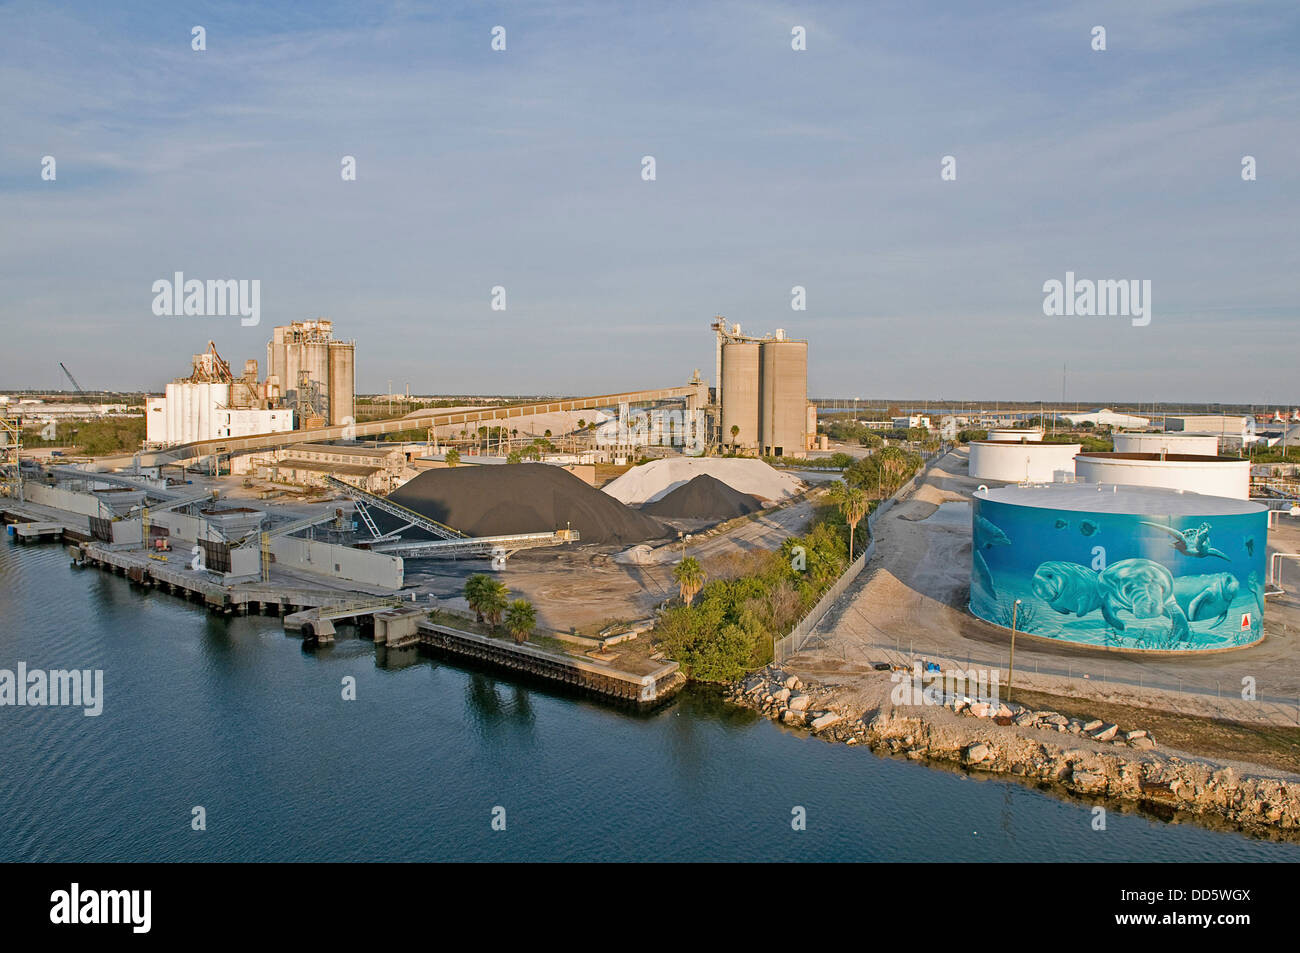 USA, Florida, Tampa, An attempt to put an environment friendly face on oil storage tanks along Maritime Boulevard. Stock Photo